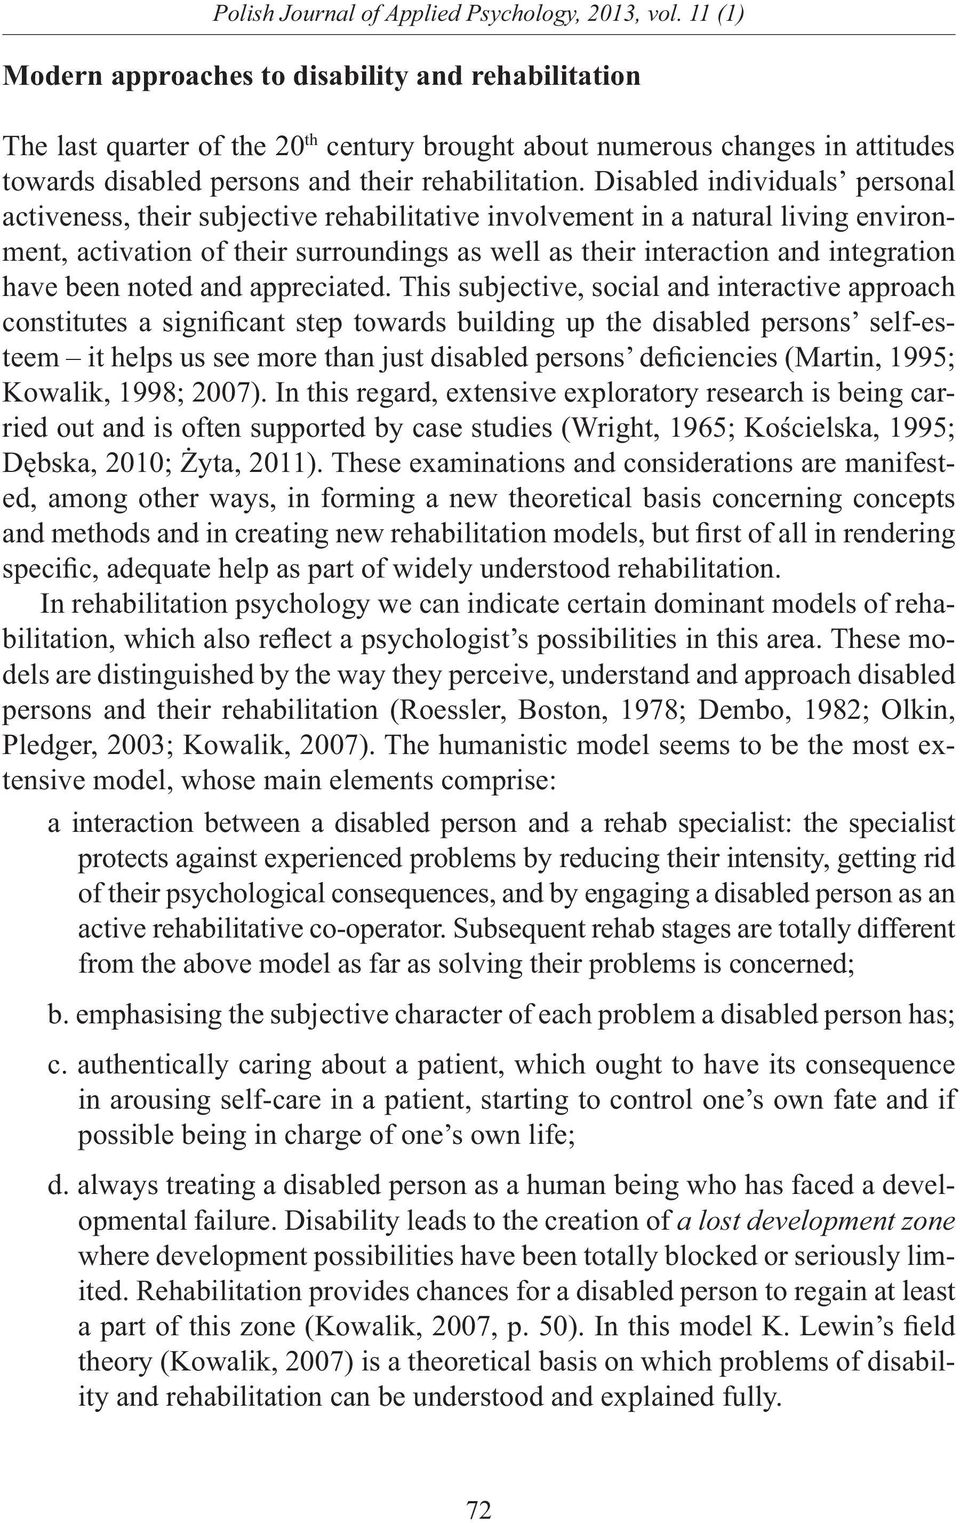 Disabled individuals personal activeness, their subjective rehabilitative involvement in a natural living environment, activation of their surroundings as well as their interaction and integration